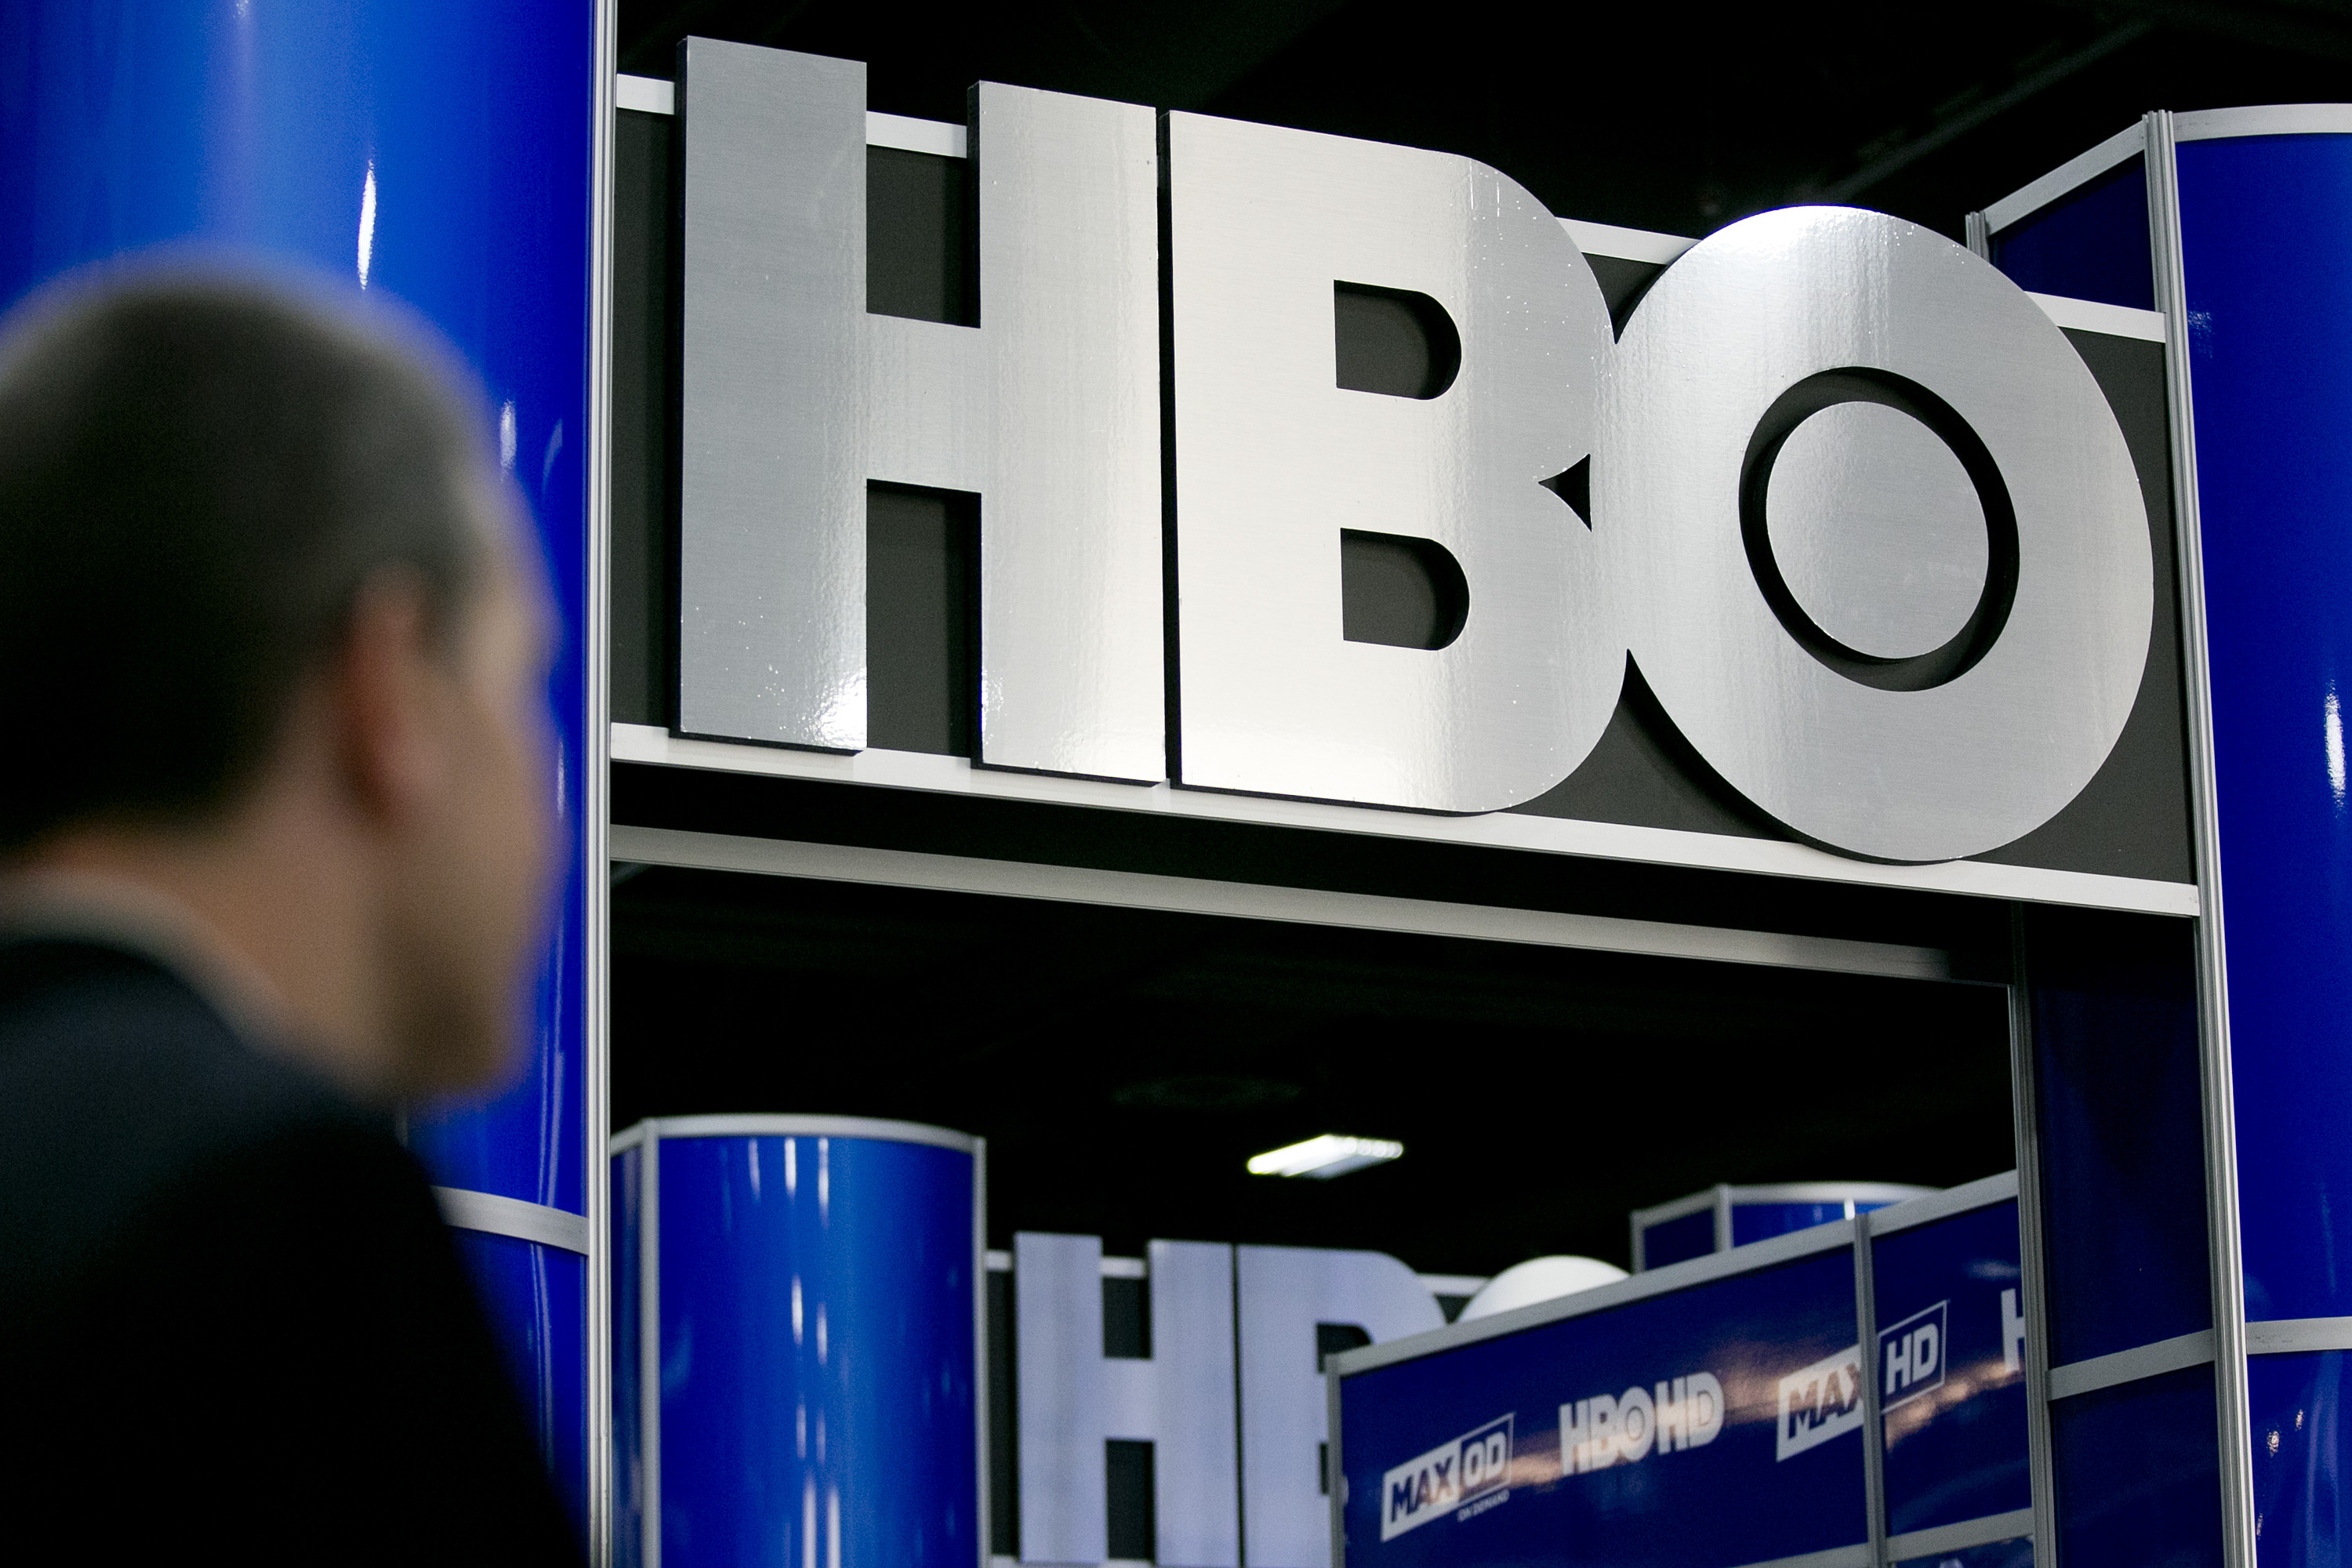 The logo of Home Box Office Inc. (HBO) is seen on the exhibit floor during the National Cable and Telecommunications Association (NCTA) Cable Show in Washington on June 11, 2013. (Bloomberg/Getty Images)